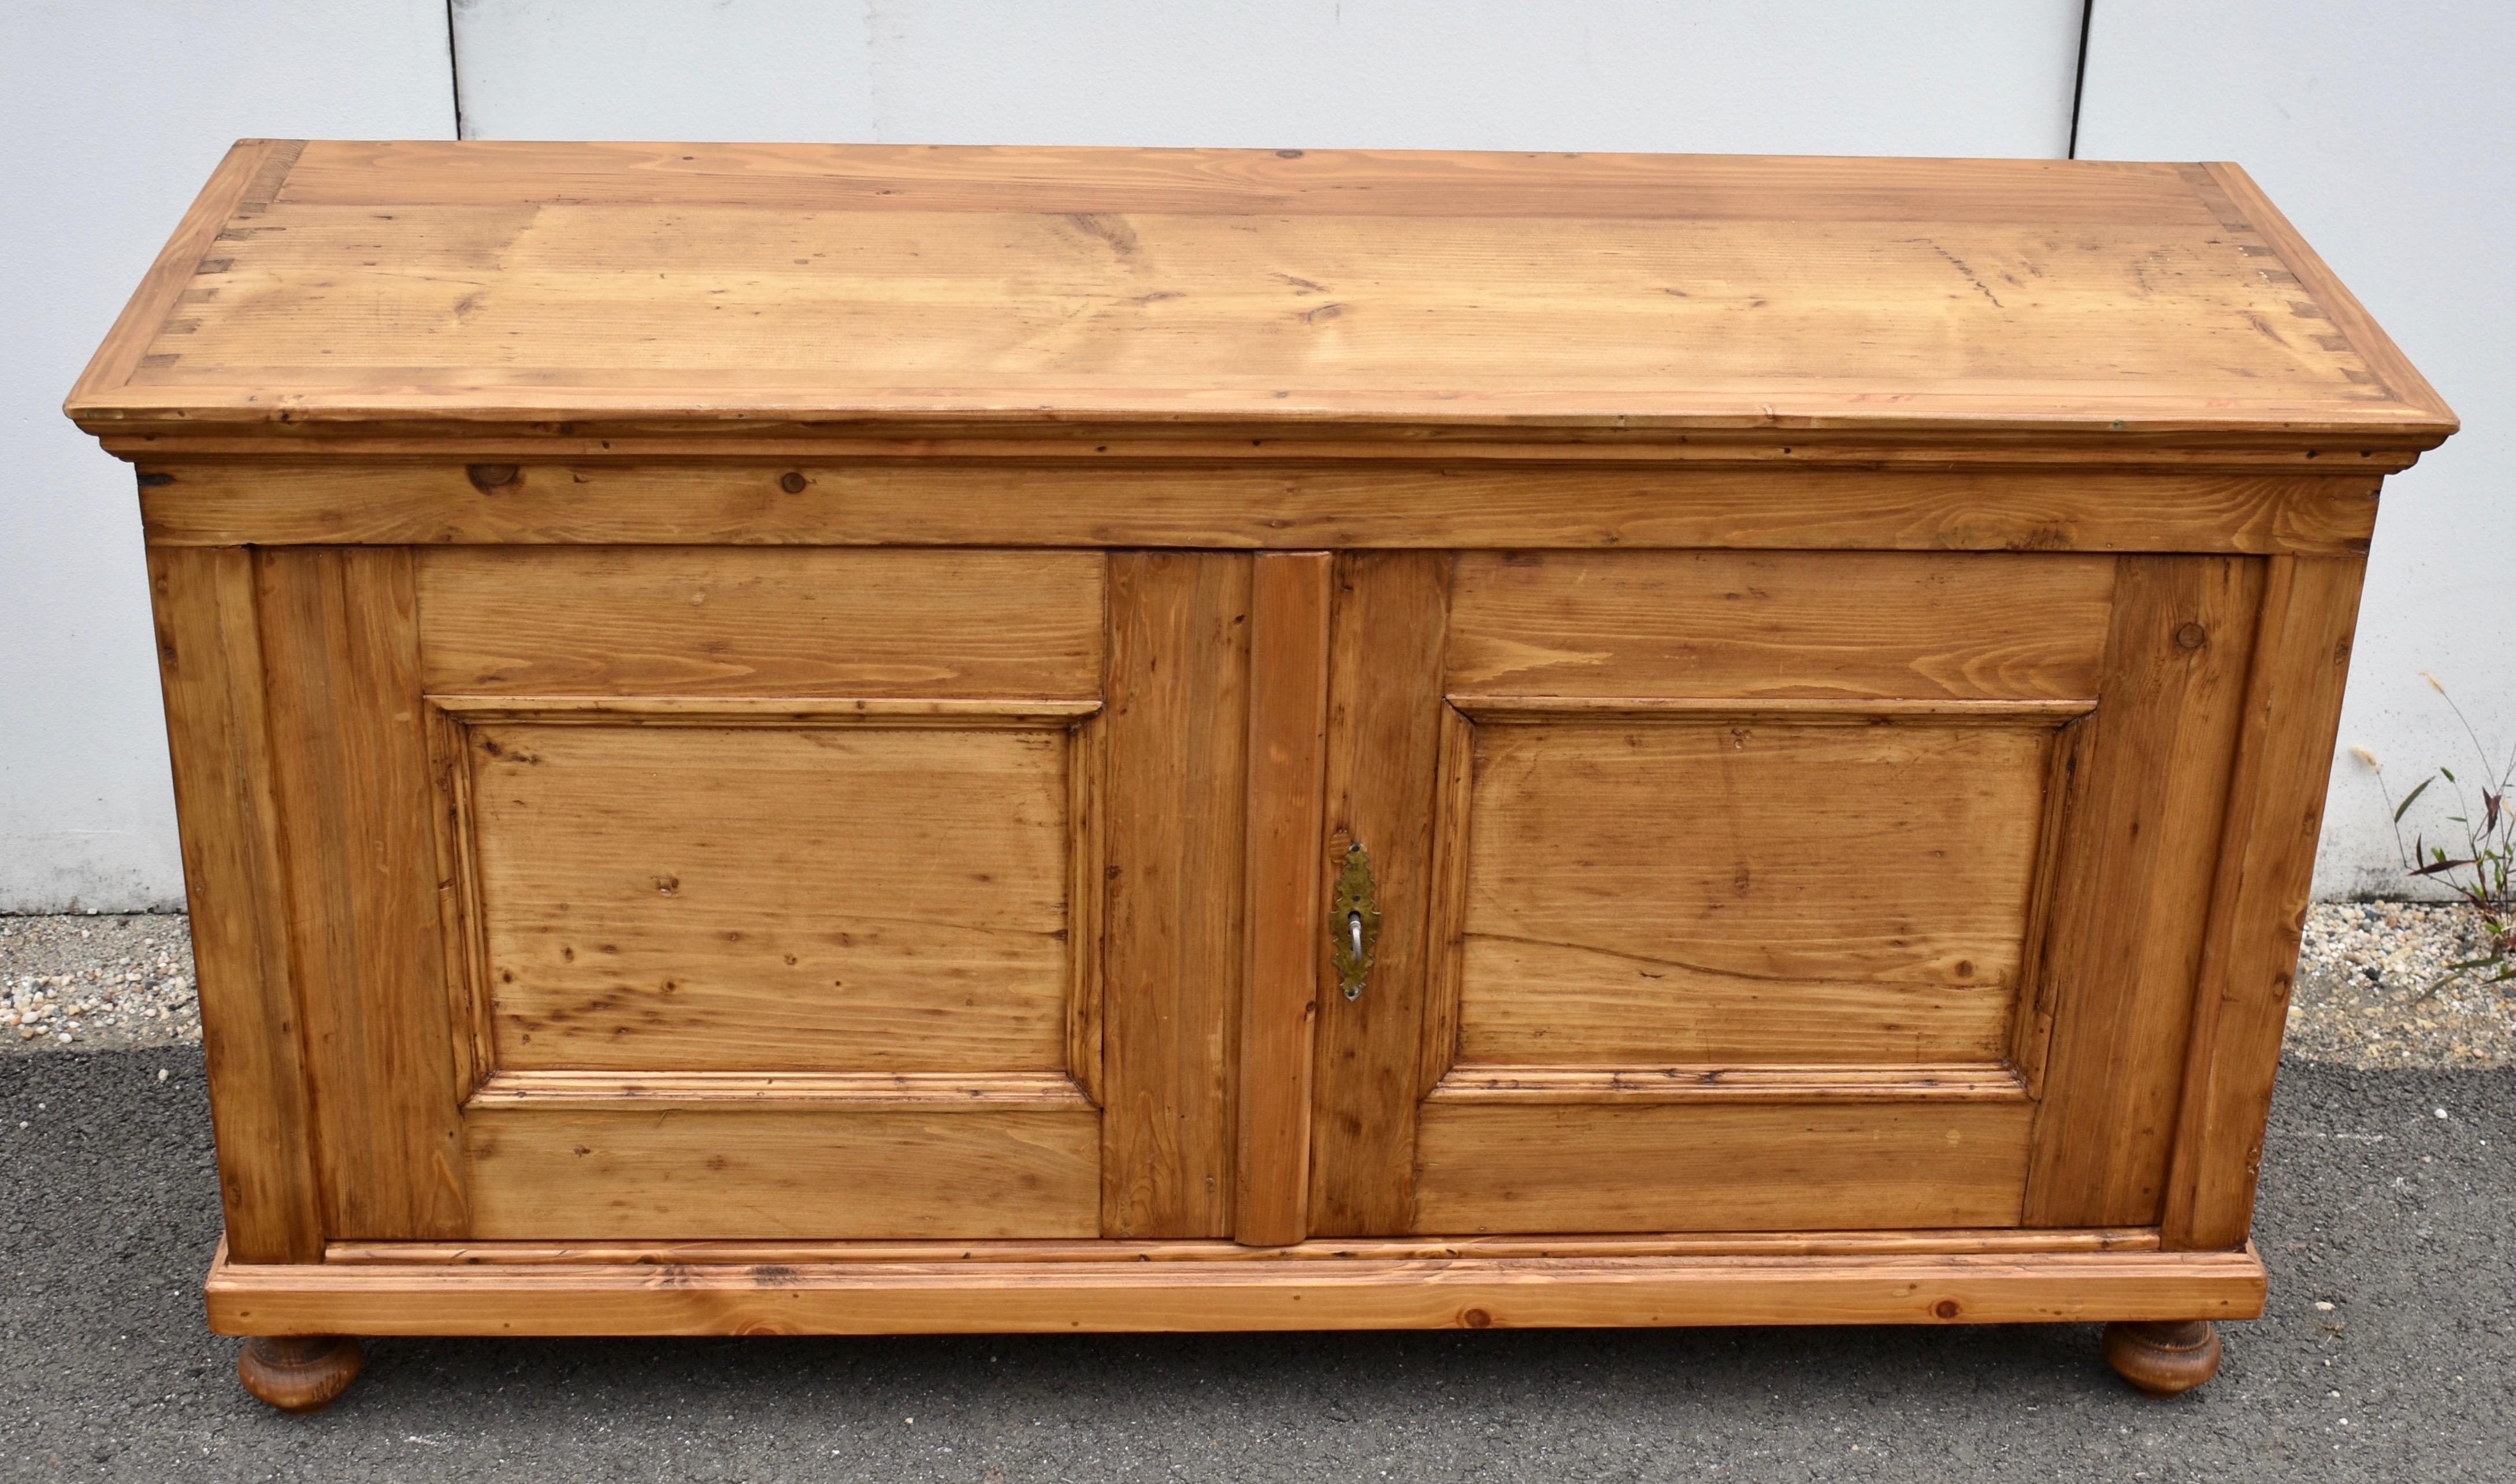 This pretty little dresser base once had a gallery, as is evidenced by the pattern of exposed dovetails on the top.  It is now perfectly flat with great dimensions for a TV stand.  Devoid of any decoration, the doors are sturdily built with broad